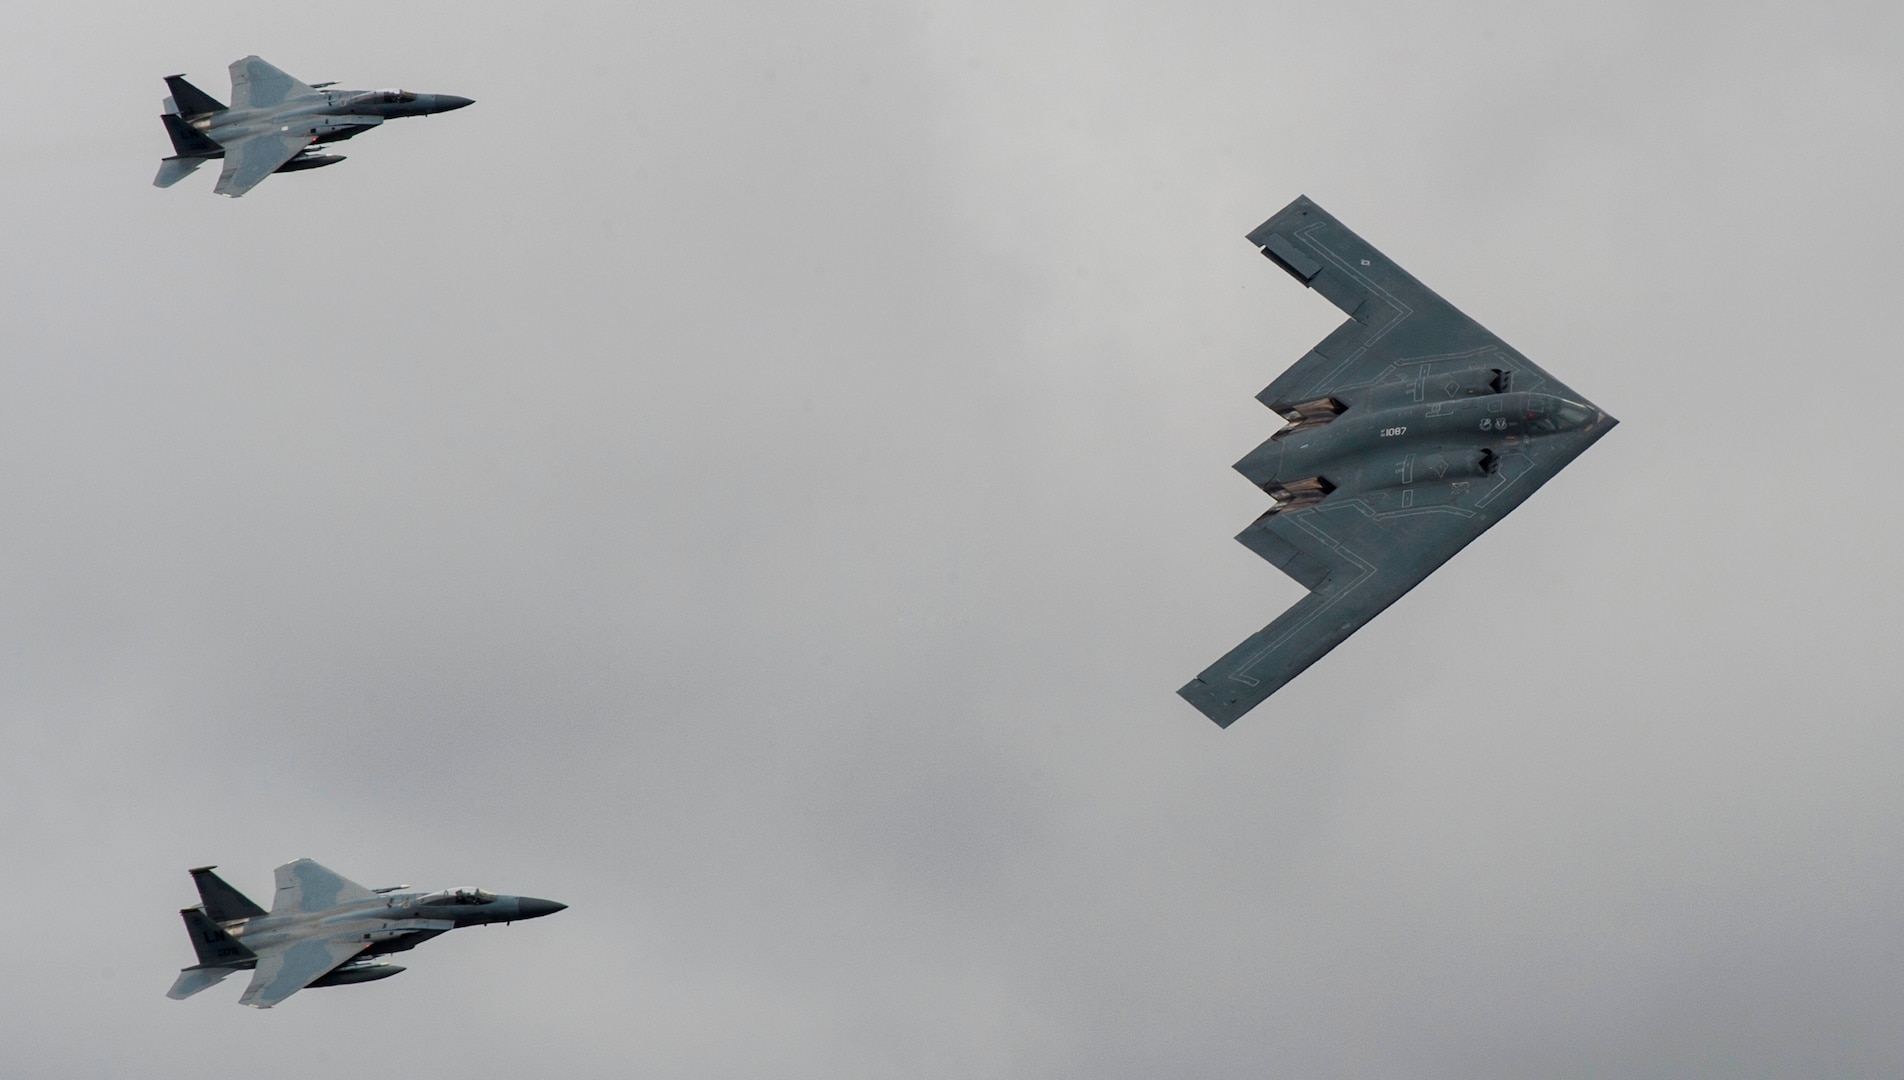 A U.S. Air Force B-2 Stealth Bomber and two F-15 Strike Eagle aircraft fly past spectators during the 2017 Royal International Air Tattoo (RIAT) located at RAF Fairford, United Kingdom, on July 16, 2017. This year commemorates the U.S. Air Force’s 70th Anniversary, which was highlighted during RIAT by displaying its lineage and advancements in military aircraft. (U.S. Air Force photo by Tech. Sgt. Brian Kimball)